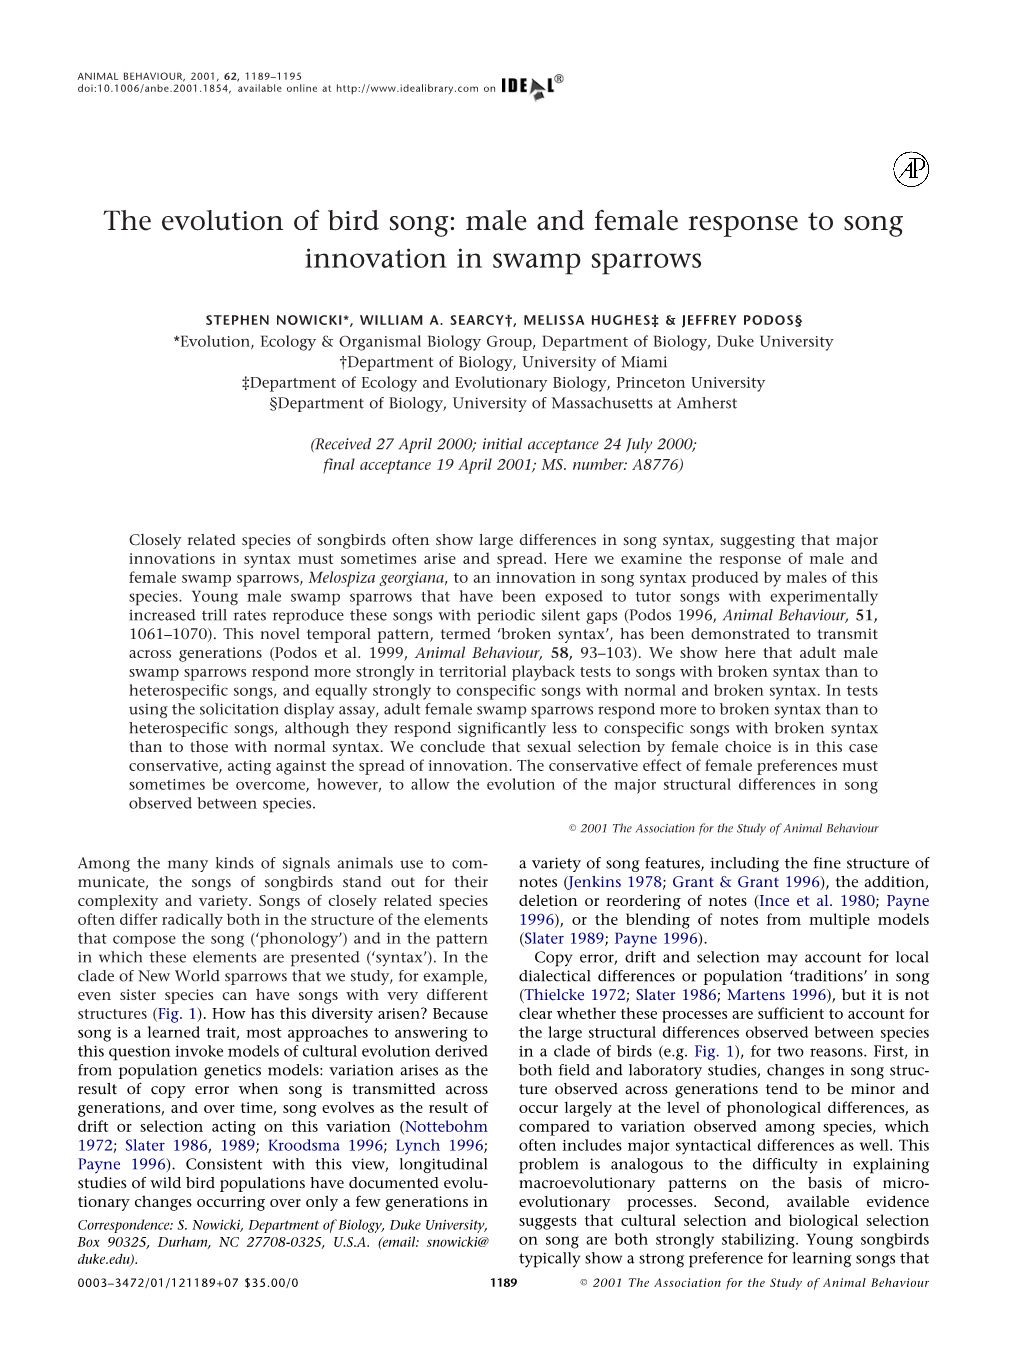 The Evolution of Bird Song: Male and Female Response to Song Innovation in Swamp Sparrows